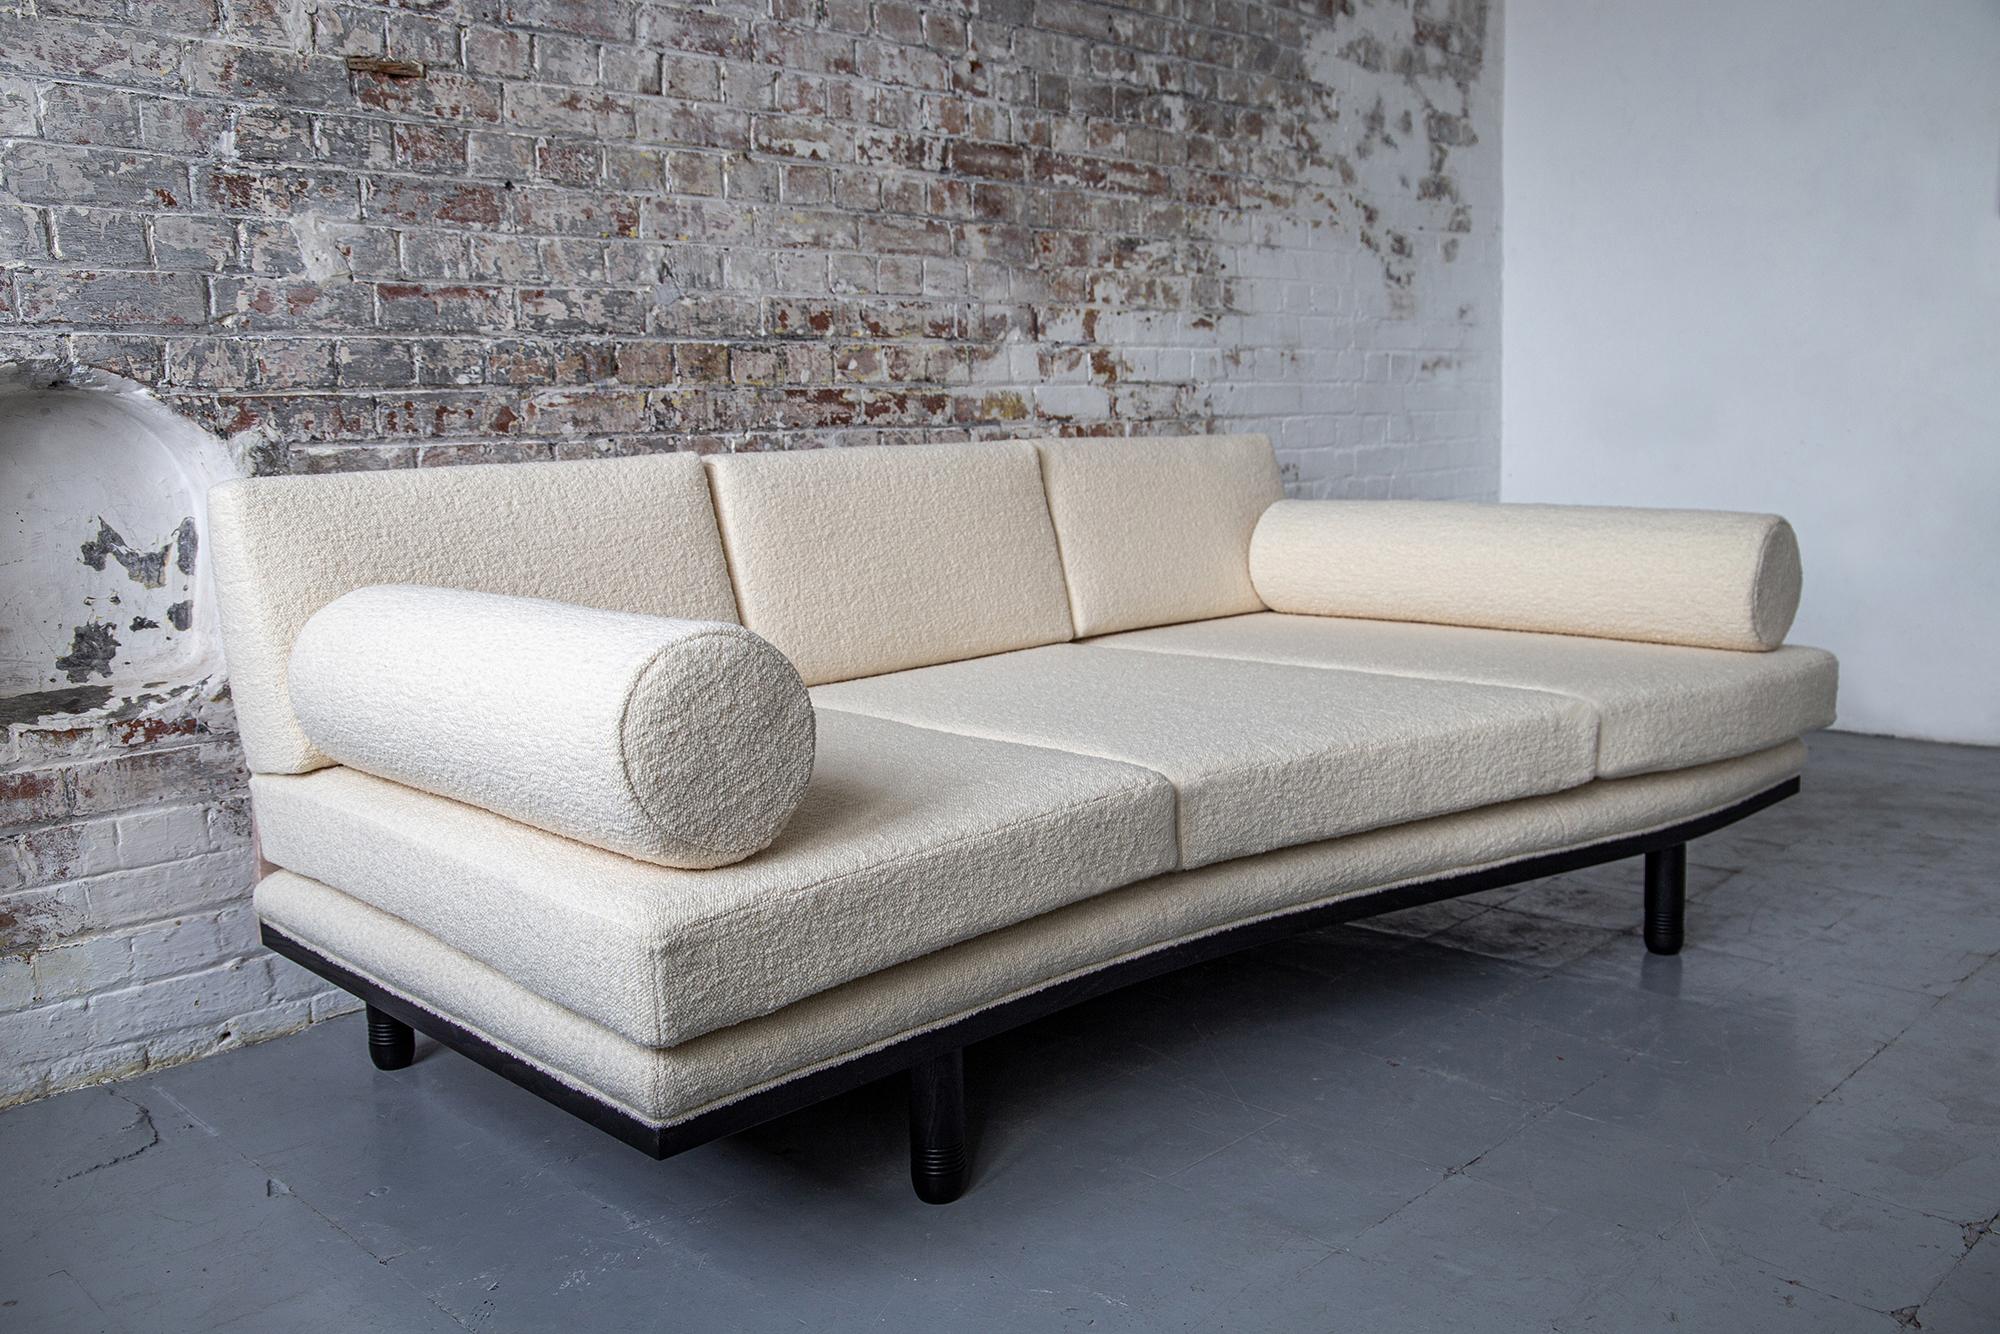 Baalbek, Trapezoidal Sofa Daybed by Toad Gallery, Contemporary Edition 2020 5